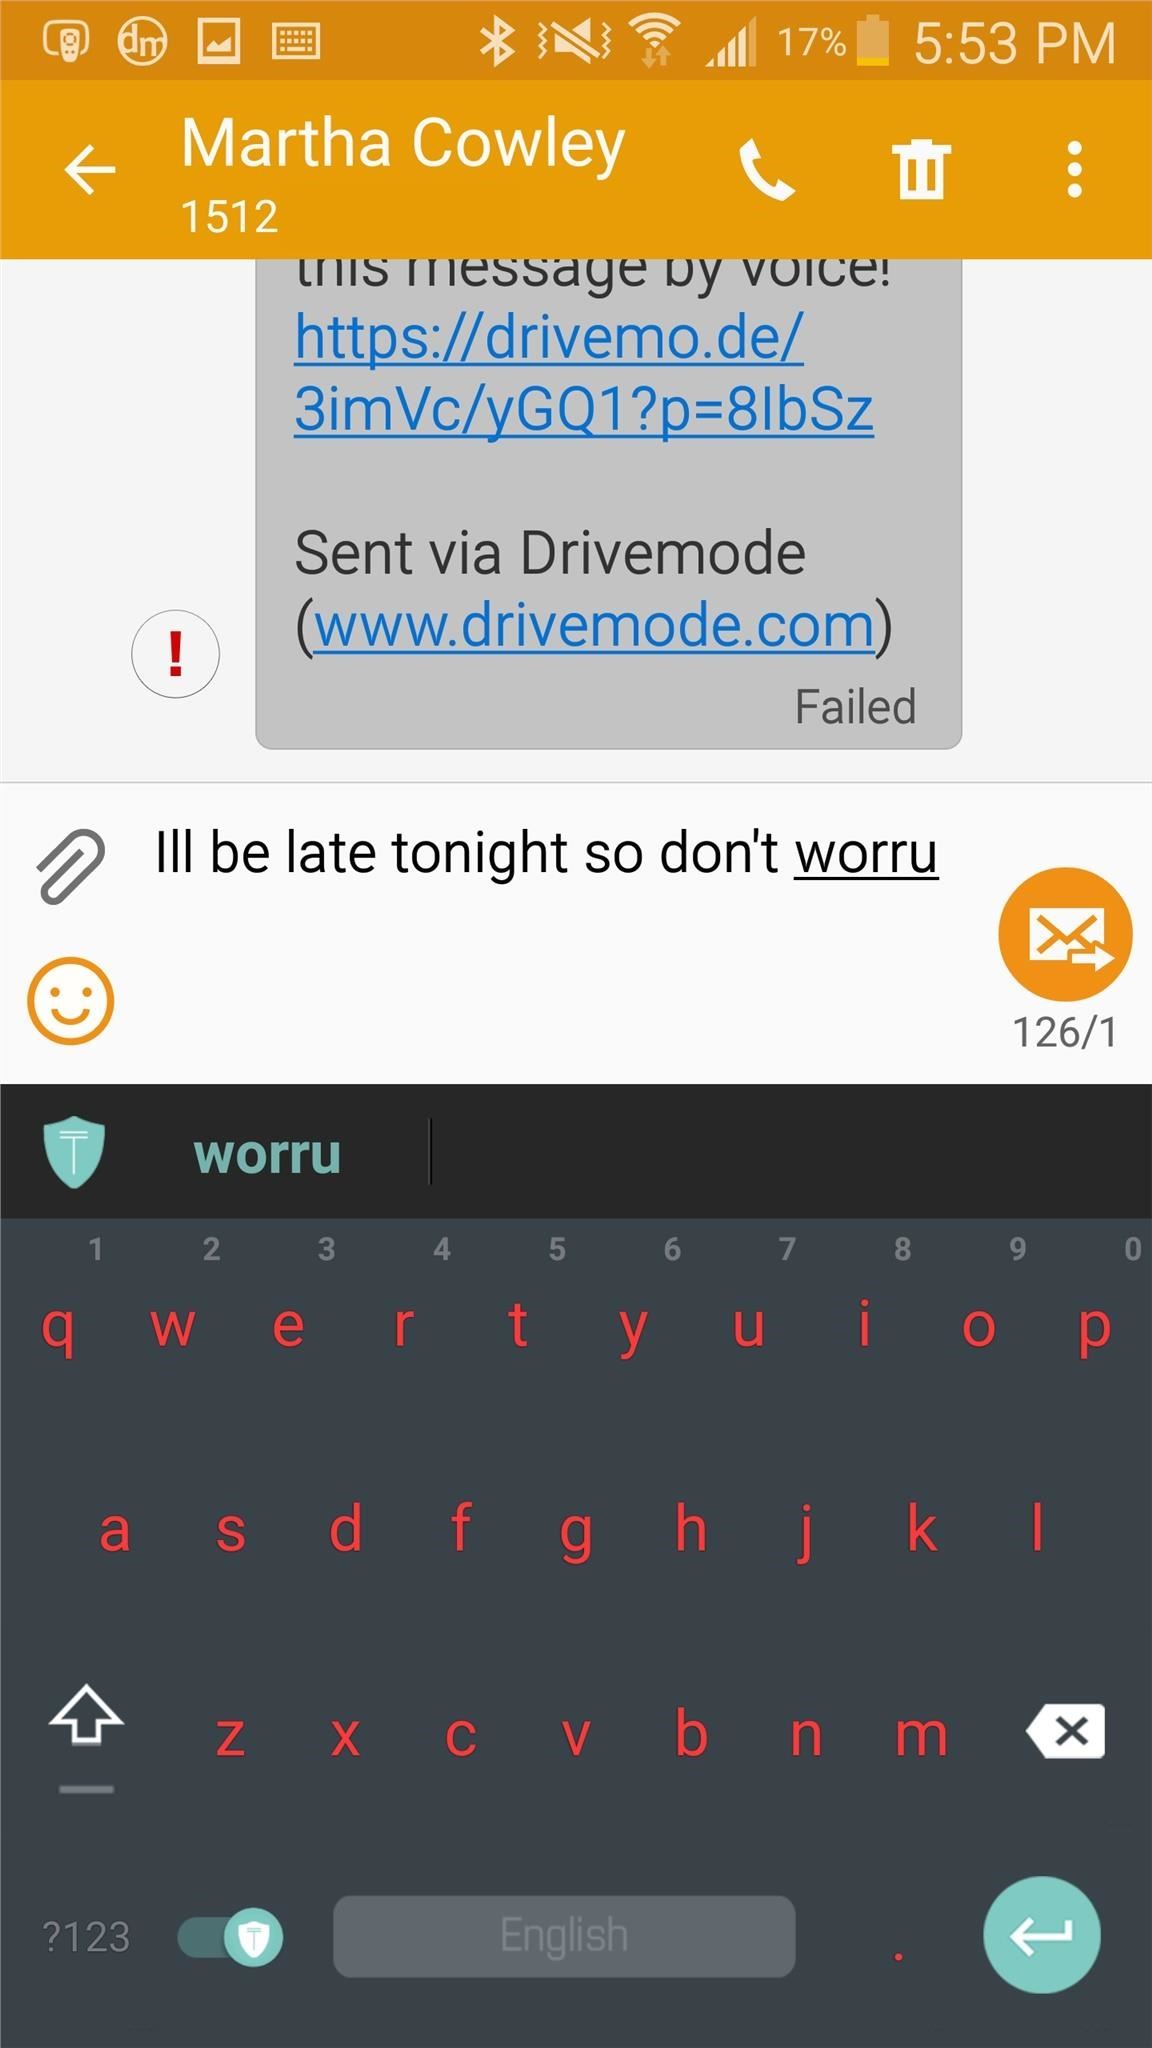 Autocorrect Only Fixes Mistakes, but This Android Keyboard Helps Prevent Them